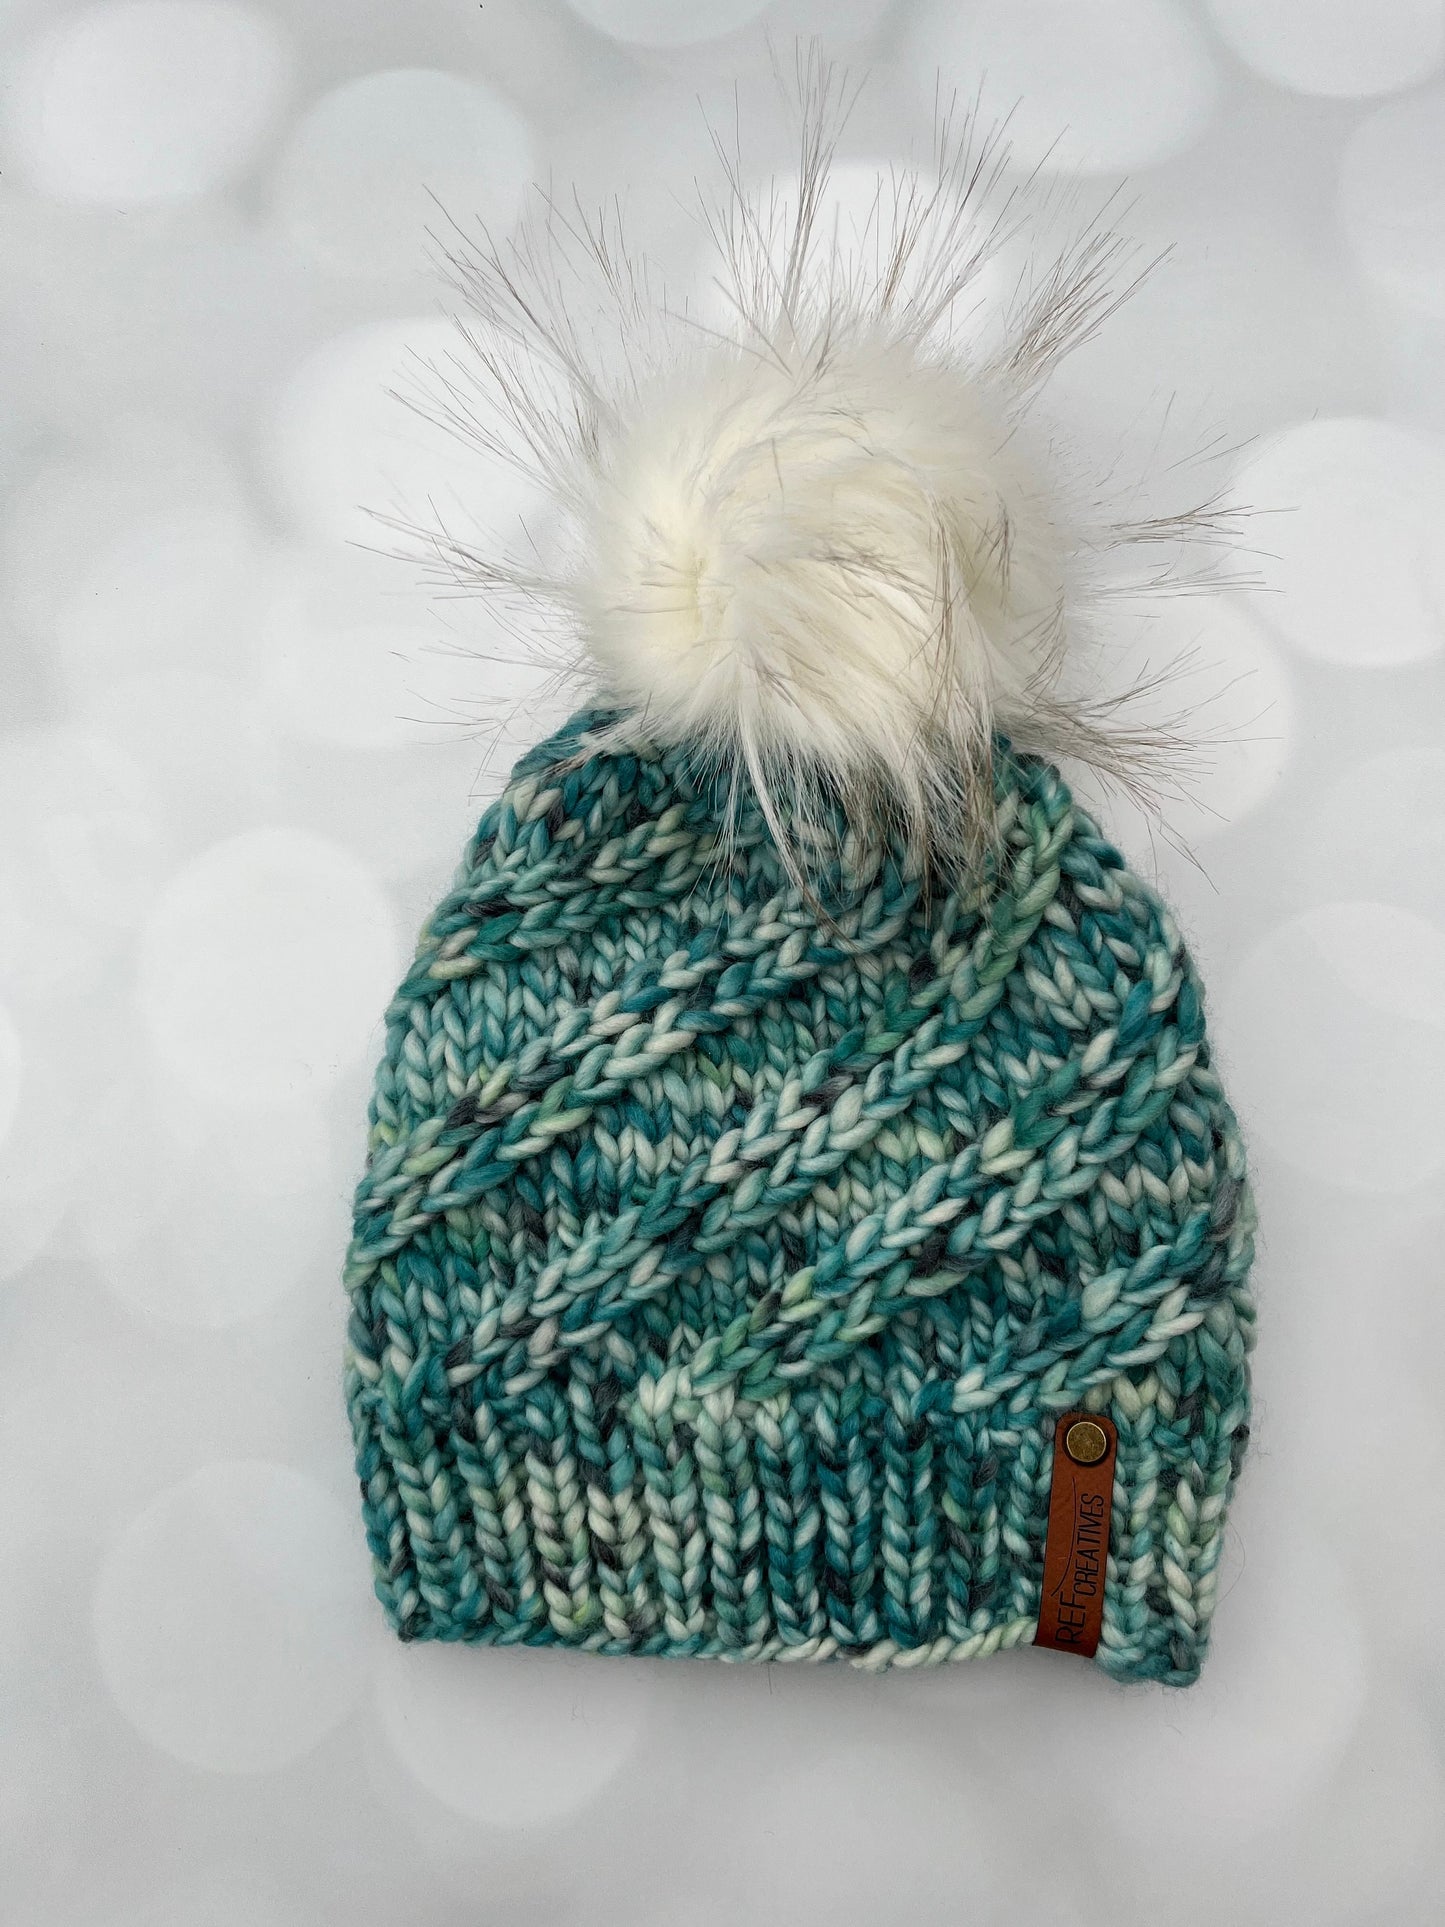 Luxury Teal Merino Wool Knit Hat - Teal and White Swirls Hand Knit Hat with Hand Dyed Yarn